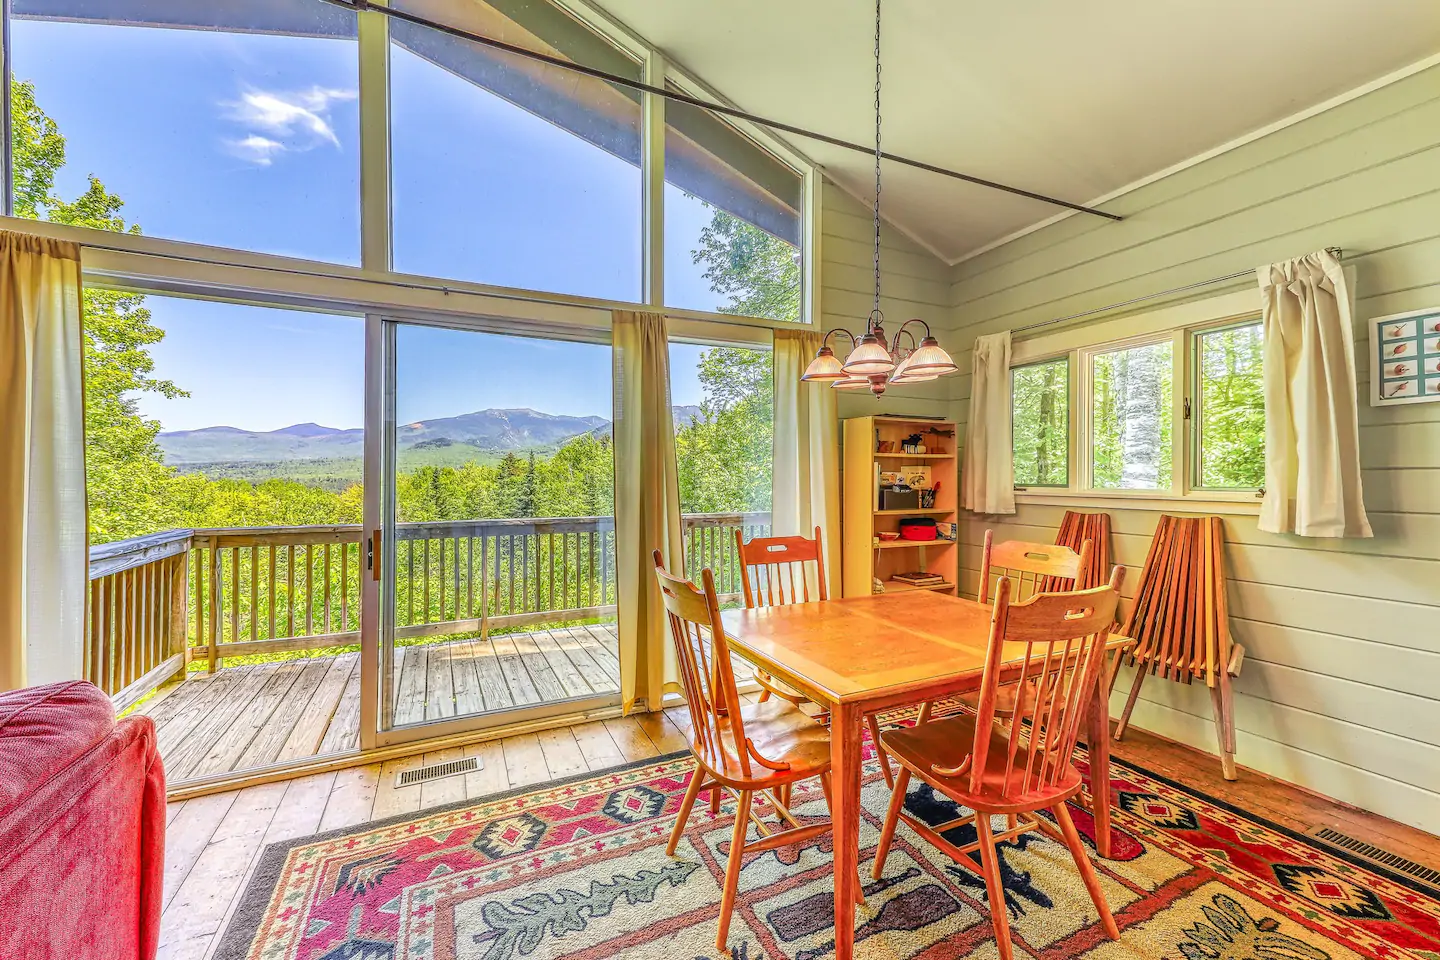 Bright kitchen with table and chairs with a wall of windows overlooking a wooden deck and mountains in the distance